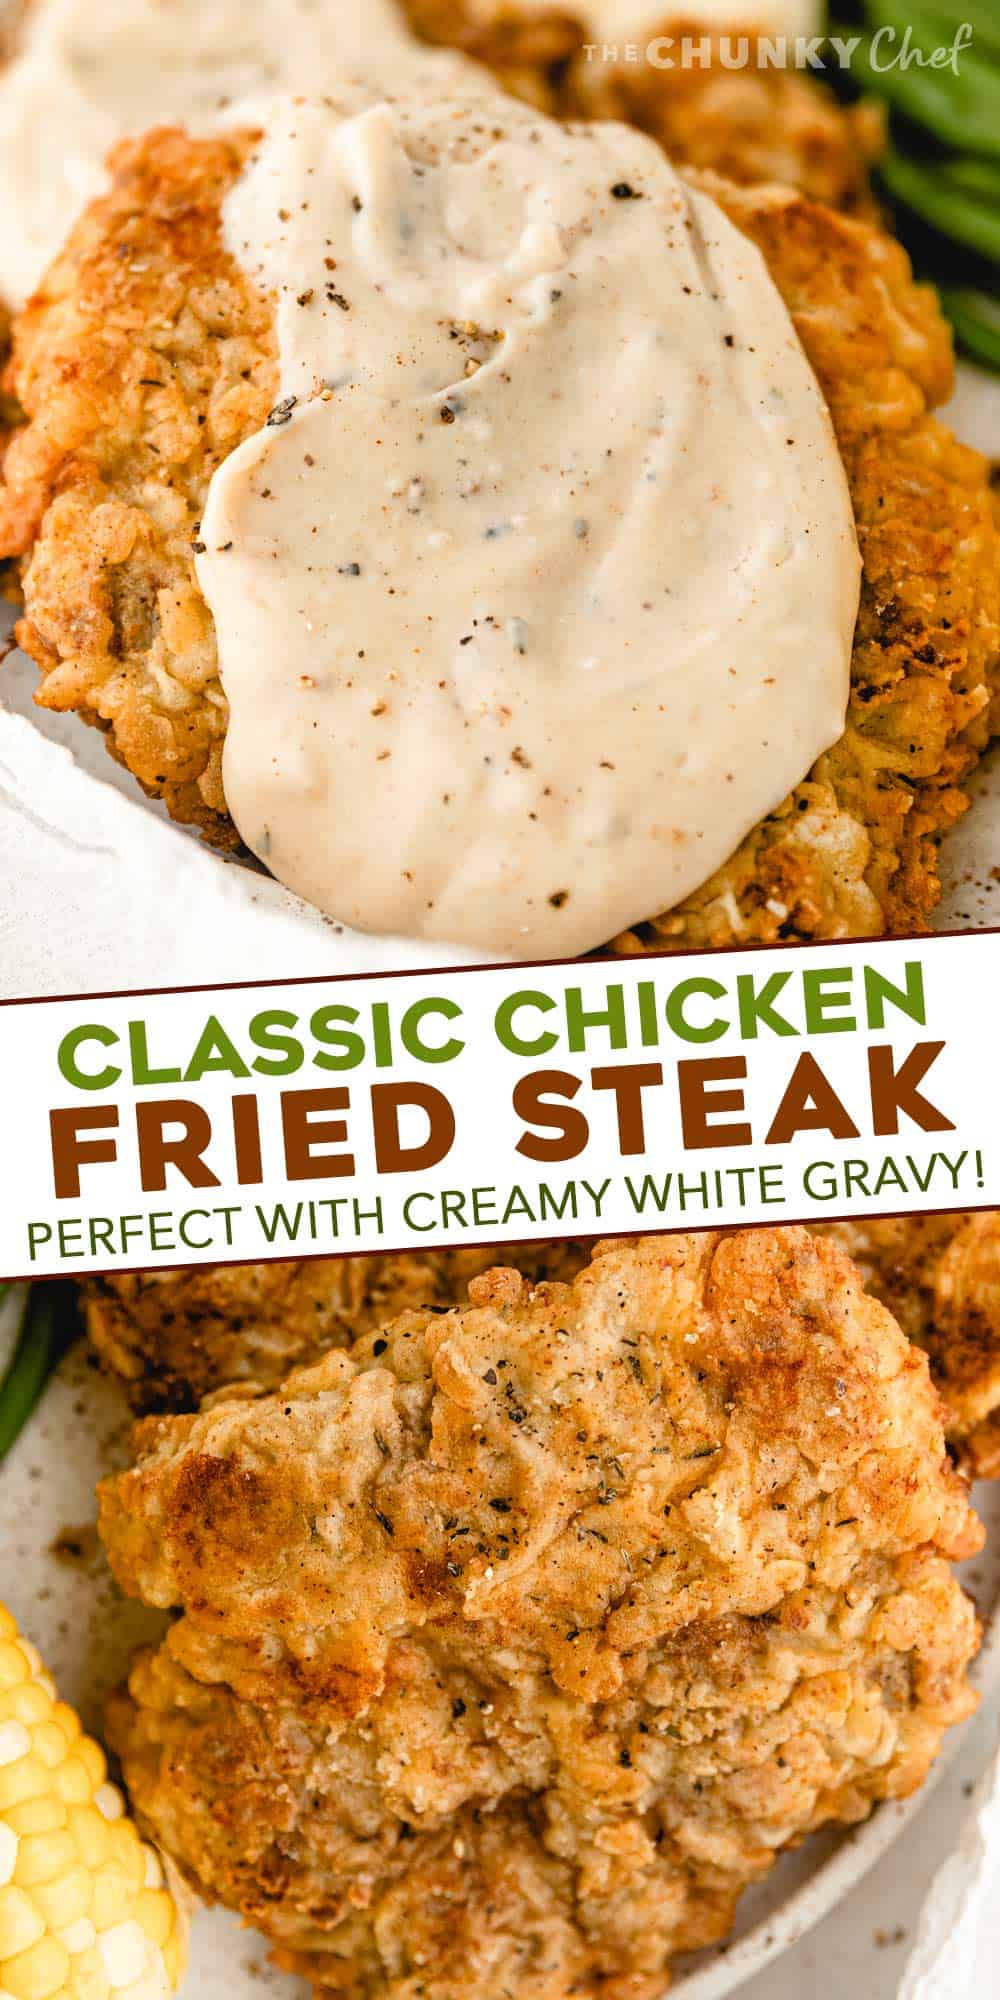 Chicken Fried Steak - The Chunky Chef